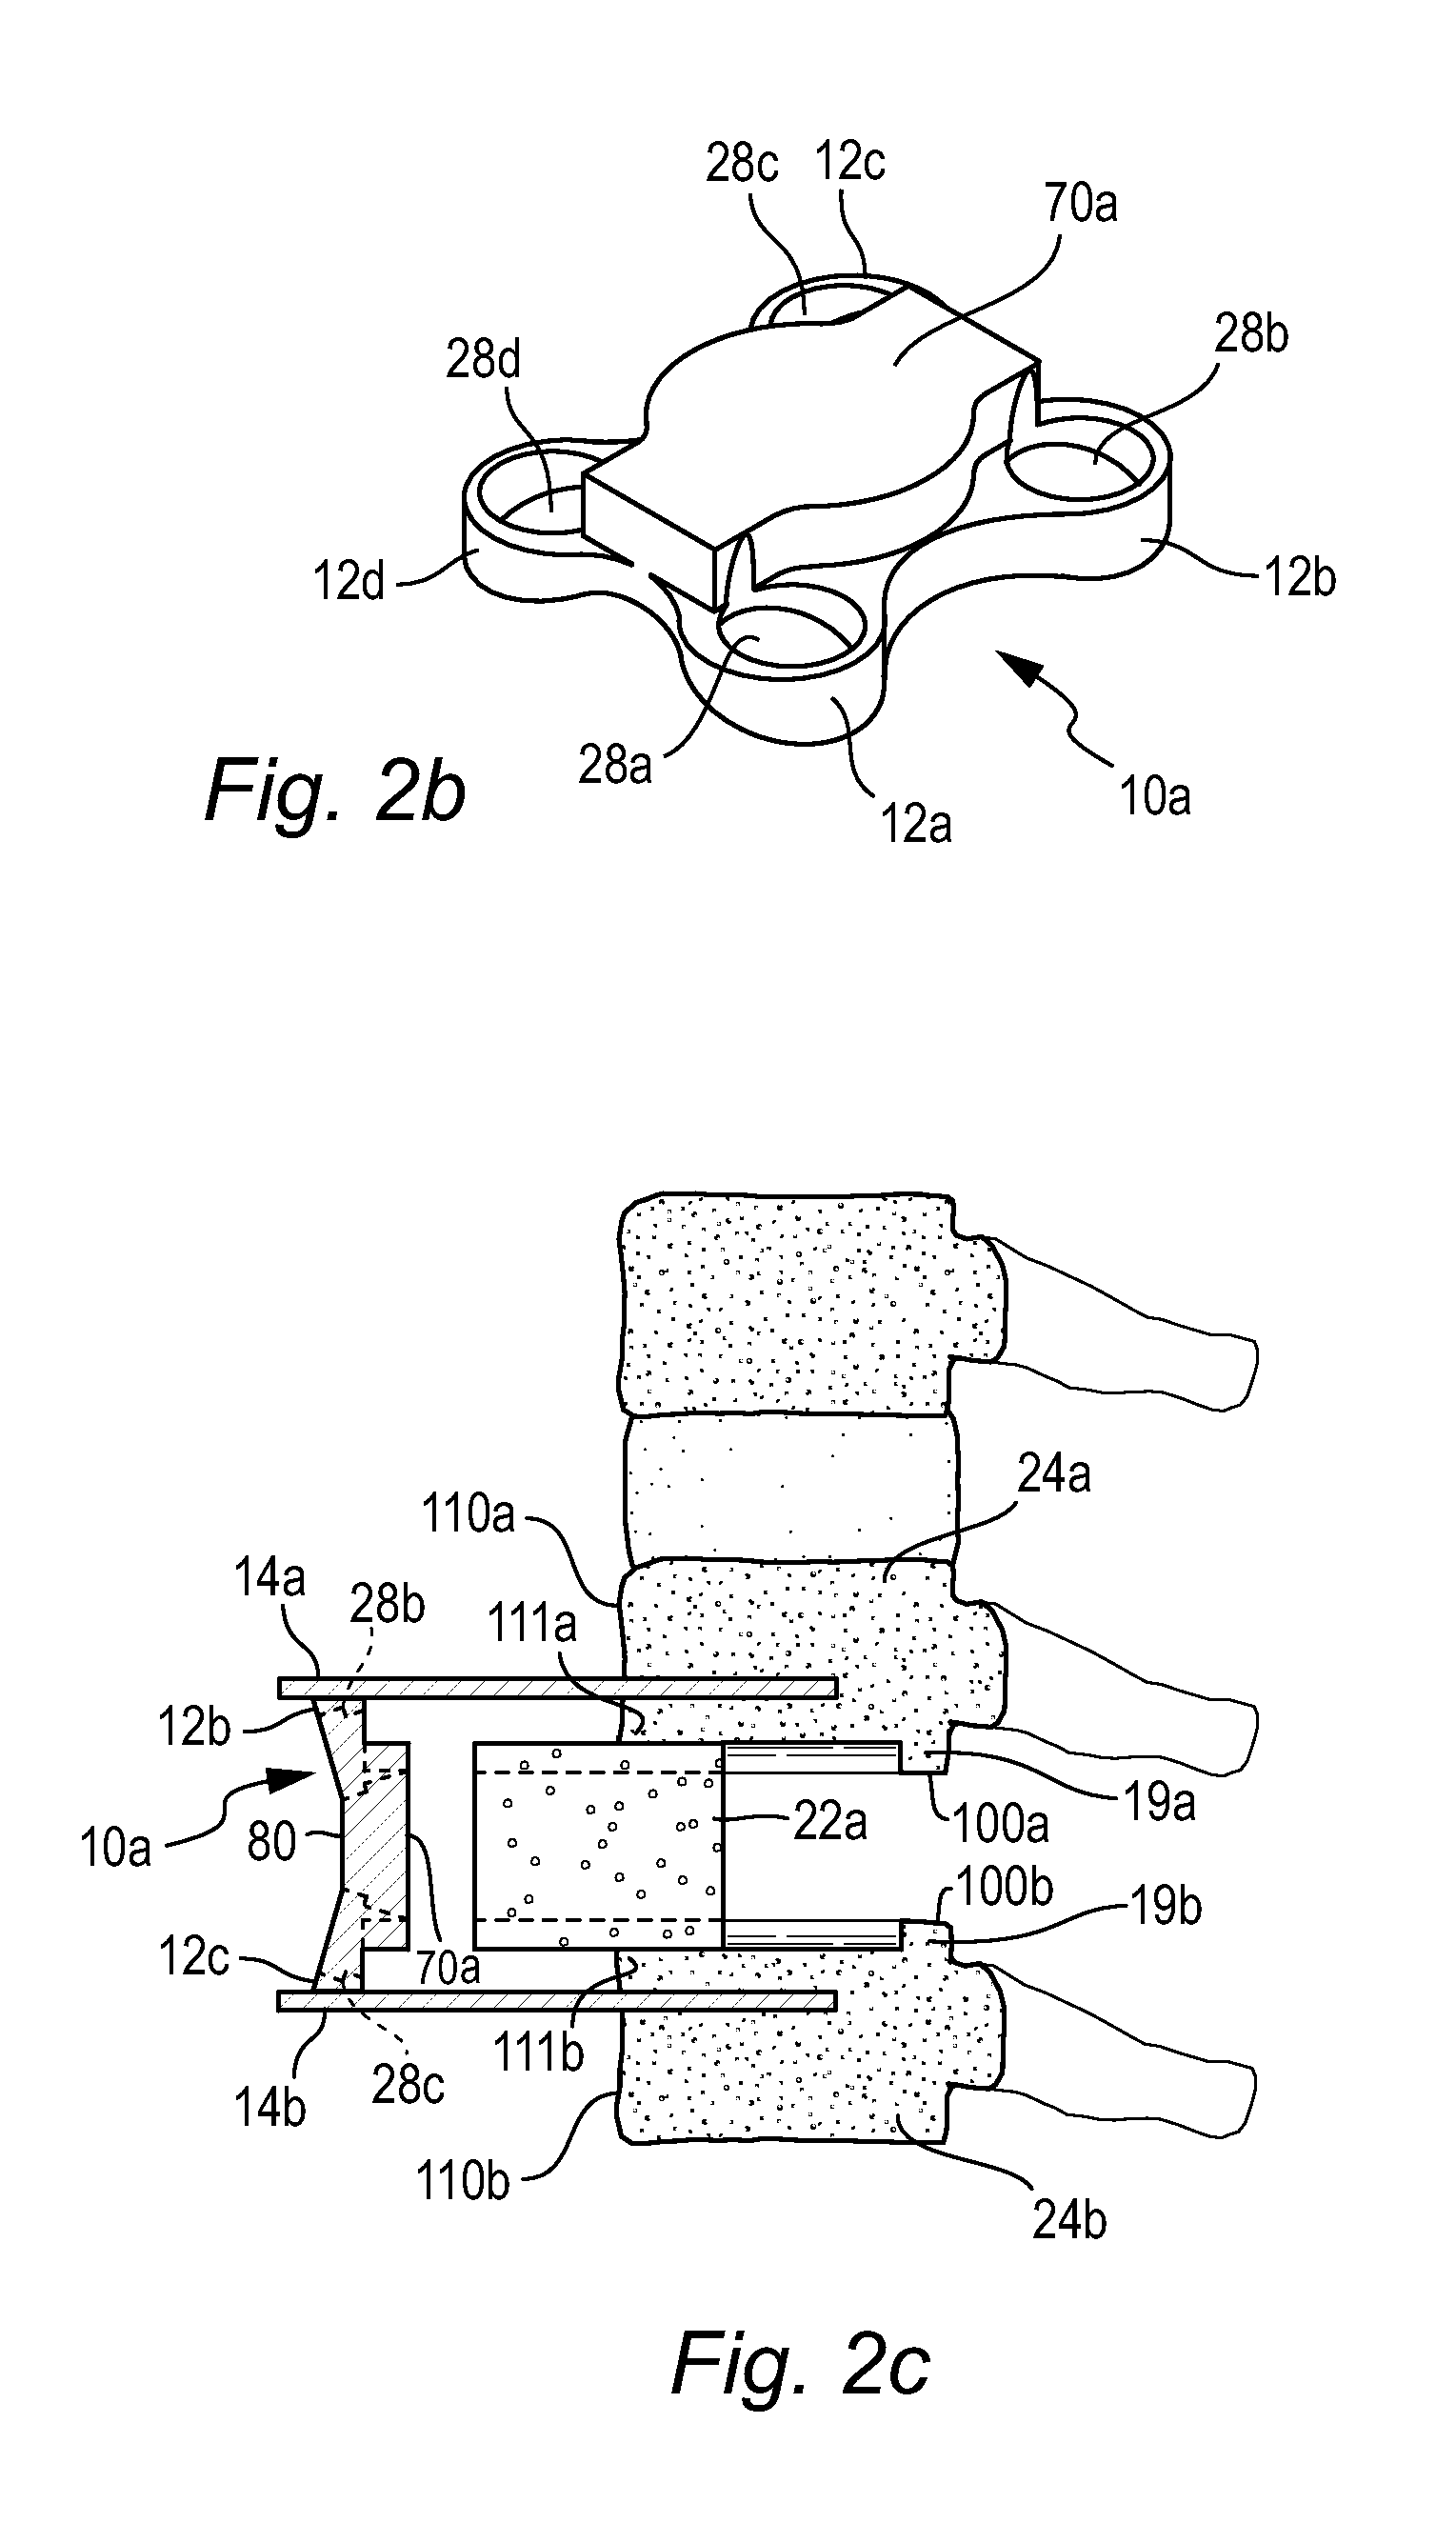 Low-profile anterior vertebral plate assemblies and methods of use